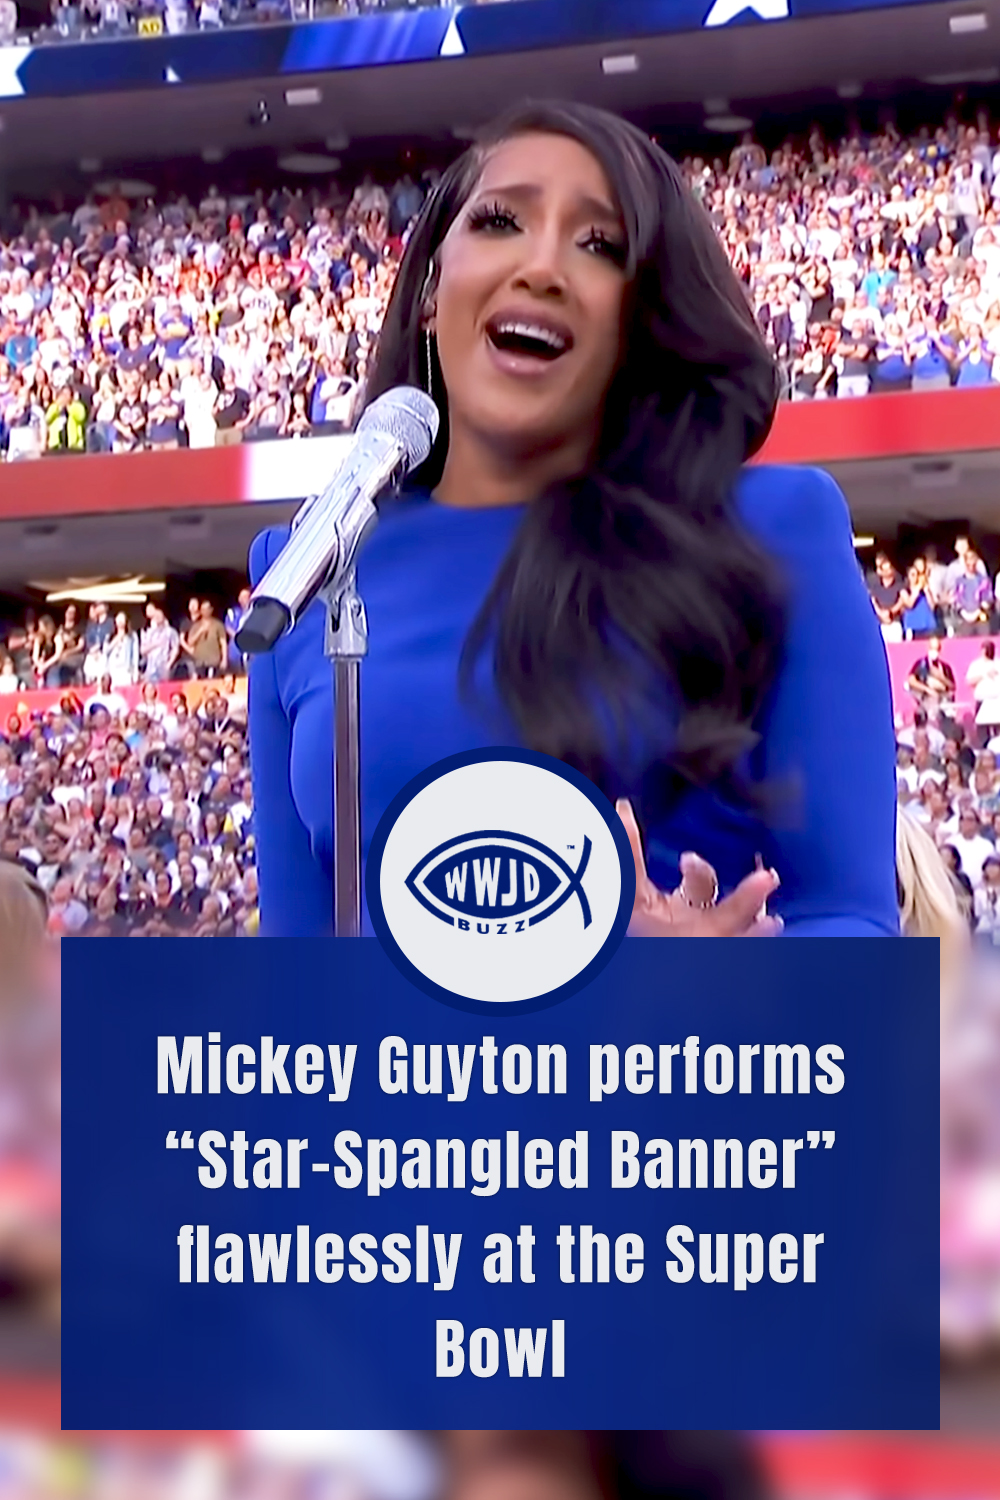 Mickey Guyton performs “Star-Spangled Banner” flawlessly at the Super Bowl